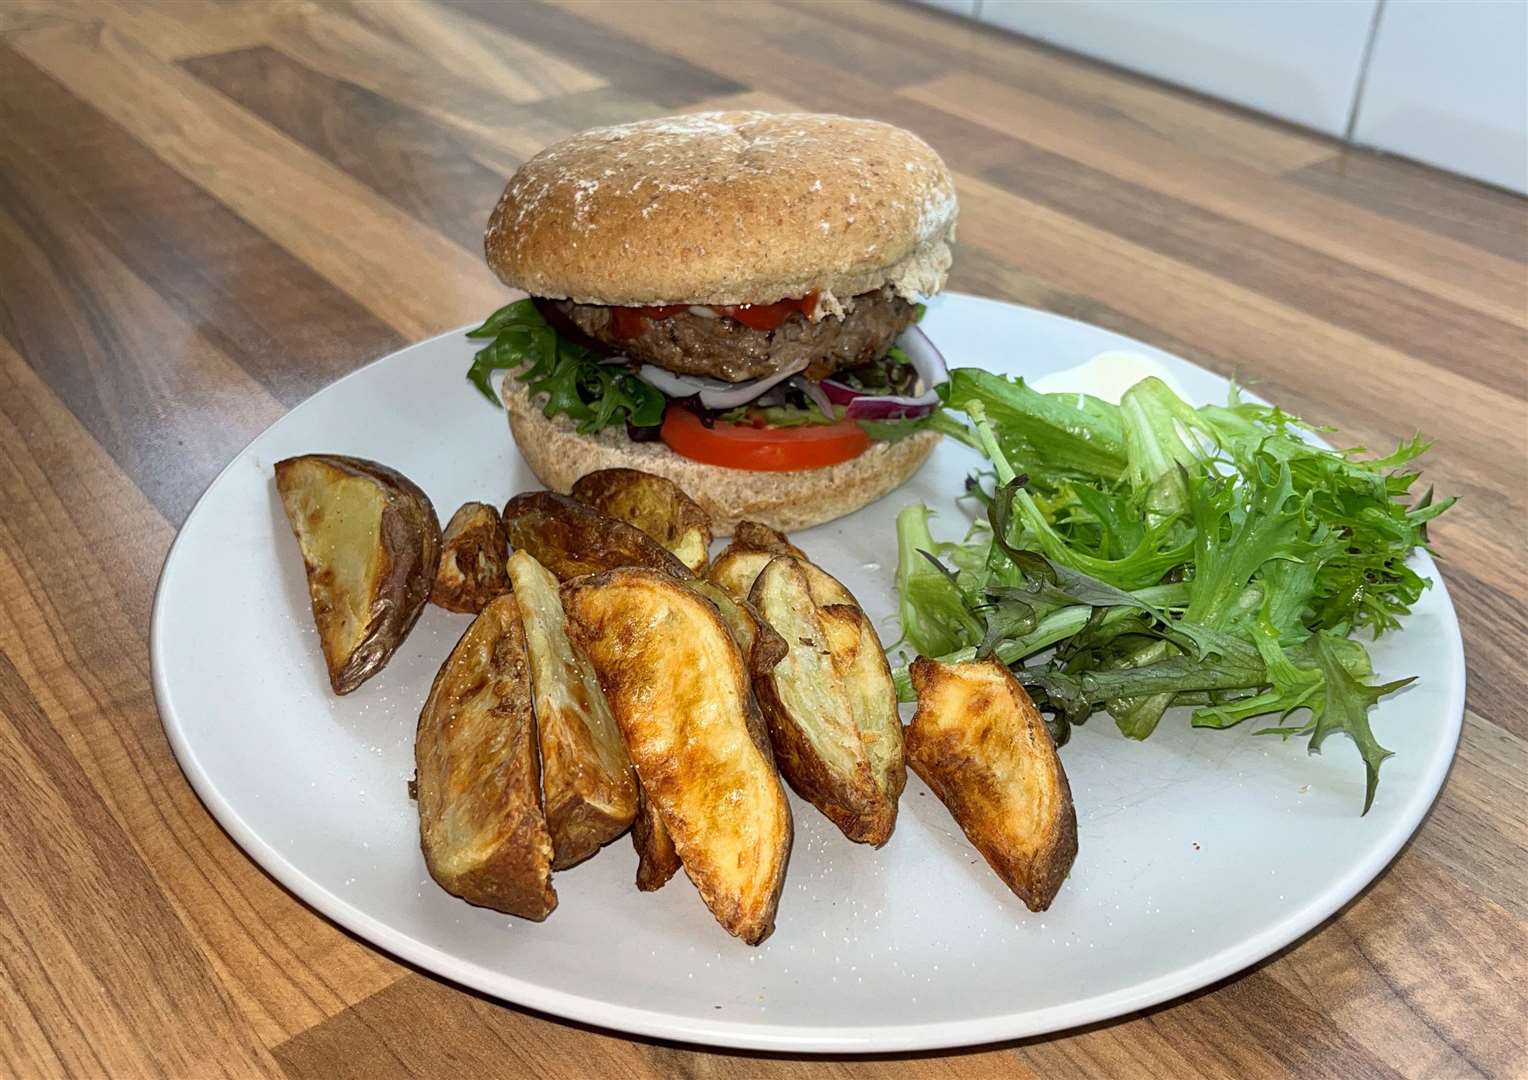 To kick start the week of cooking from scratch homemade burgers in a wholemeal bun with chips cooked in the air fryer were first on the menu